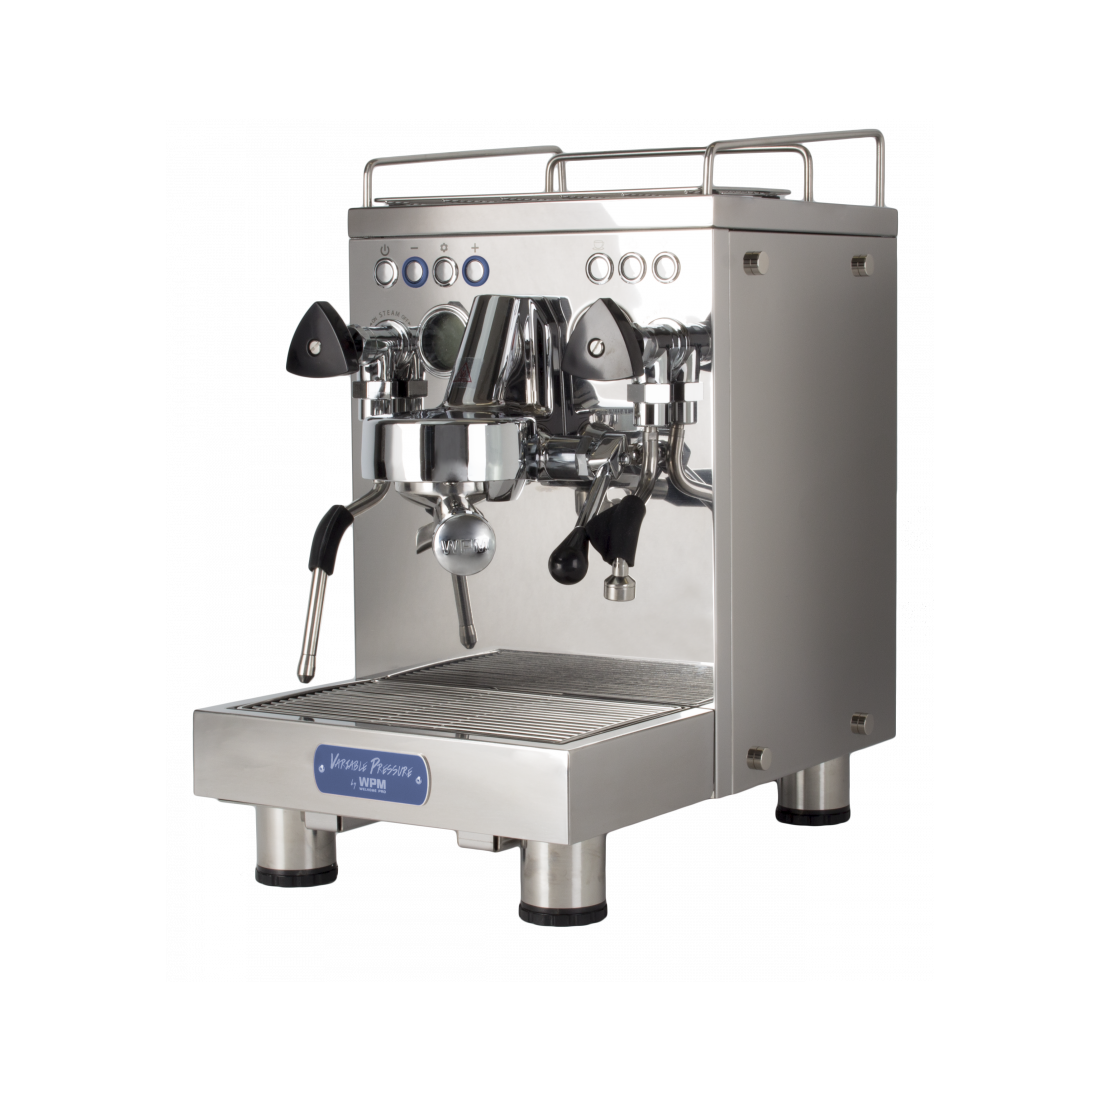 WPM (KD-310VPS) Espresso machine variable pressure with bluetooth|mkayn|مكاين